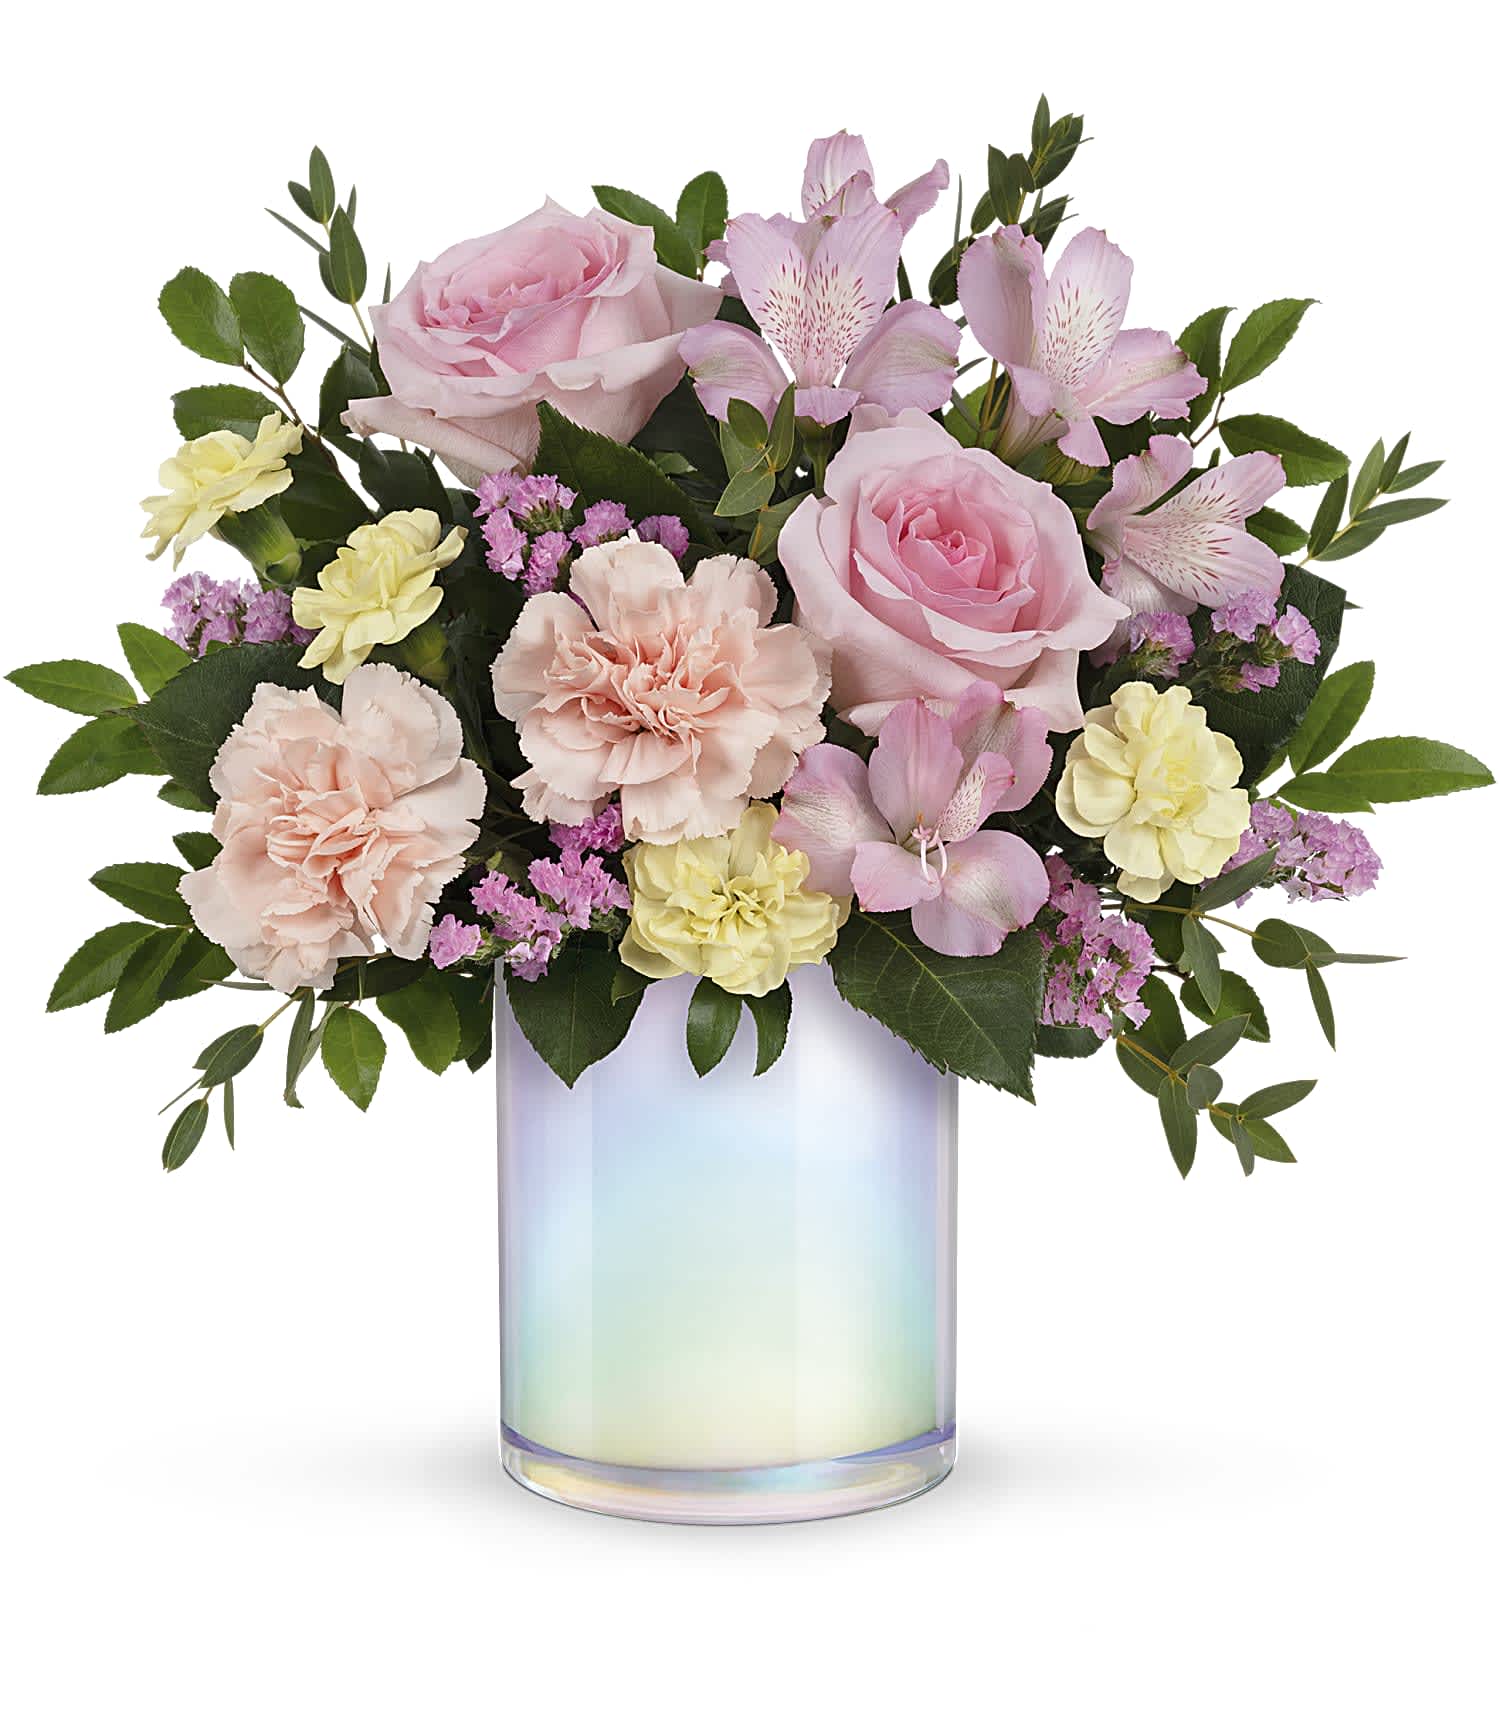 Wonderful Whimsy - Fresh as a spring breeze, this whimsical, blush-hued bouquet is presented in a white glass cylinder with magical pearlescent finish.